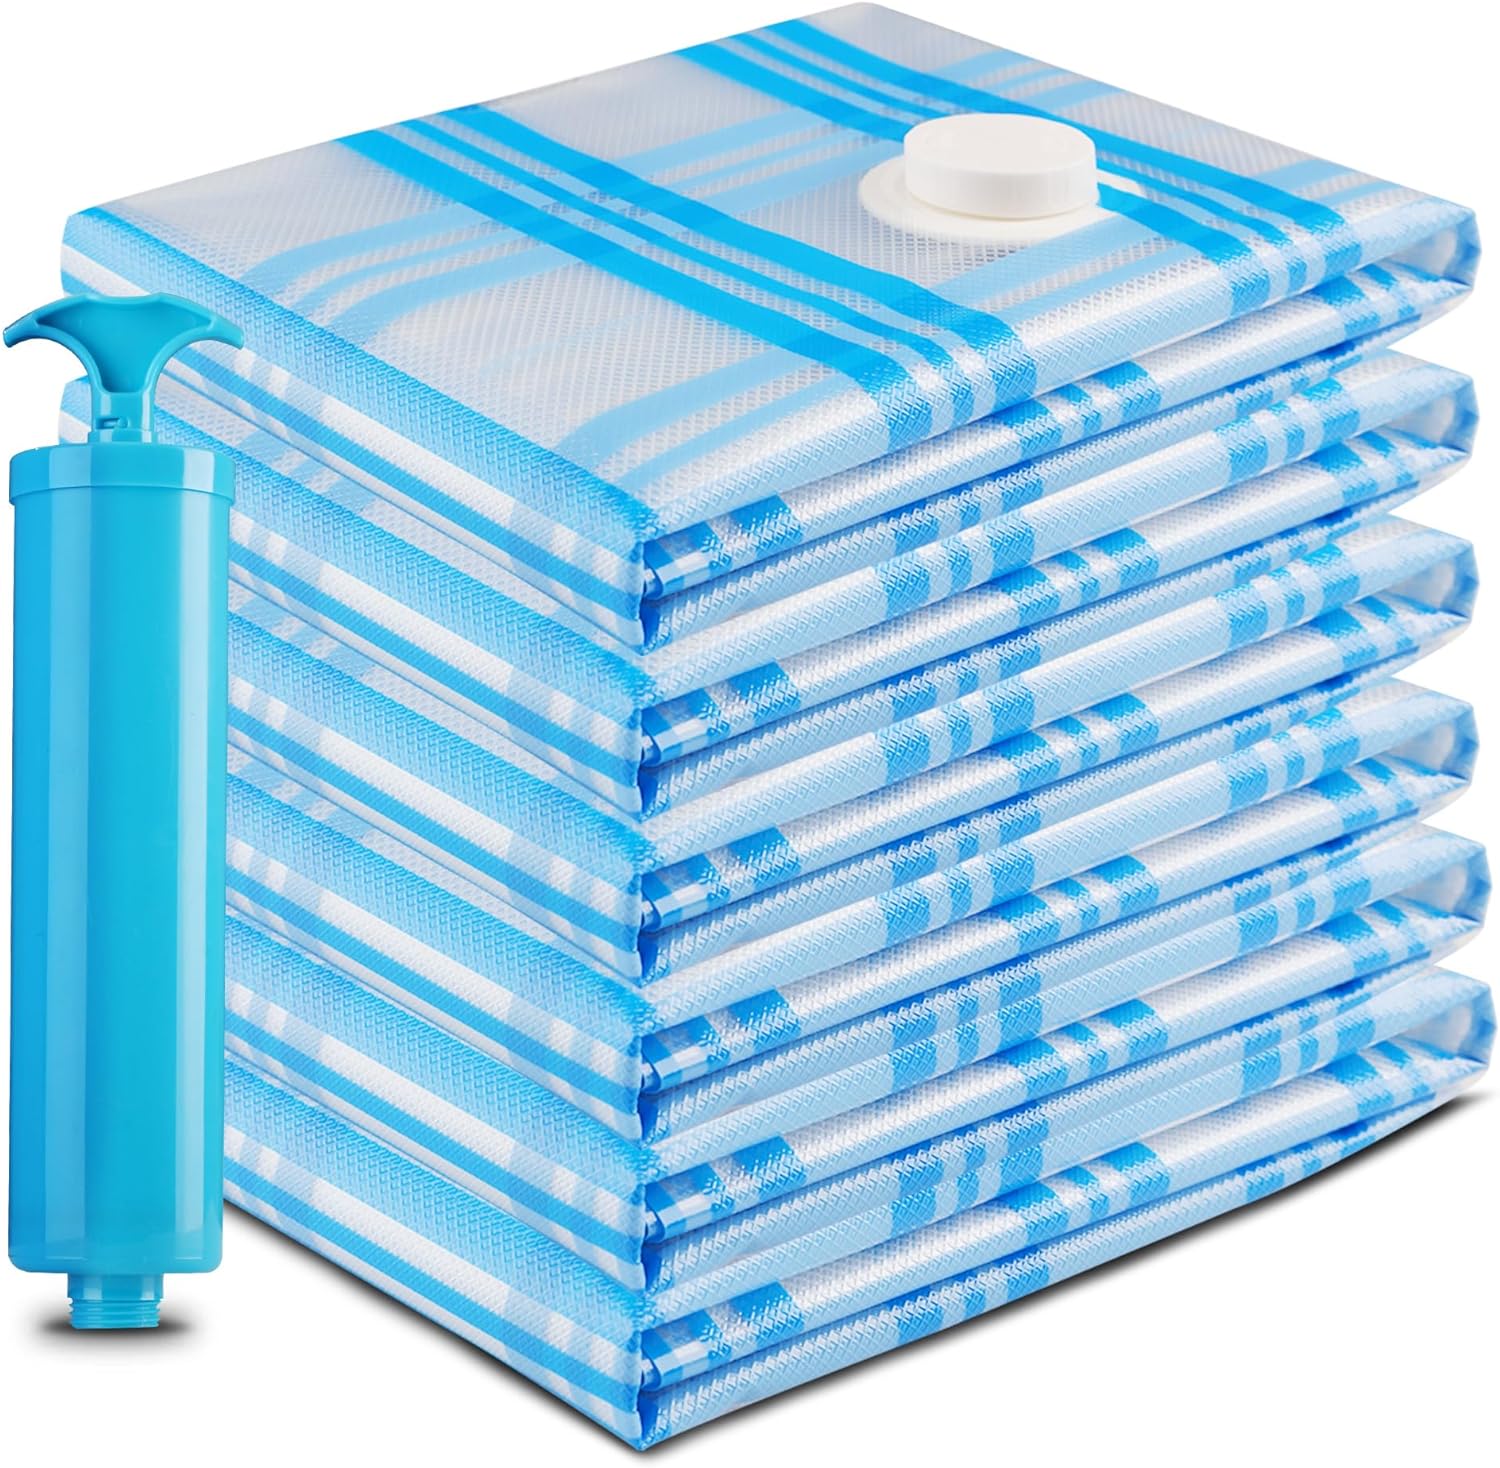 6 Jumbo Vacuum Storage Bags, Space Saver Vacuum Seal Storage Bags for Clothes, Clothing, Comforters and Blankets